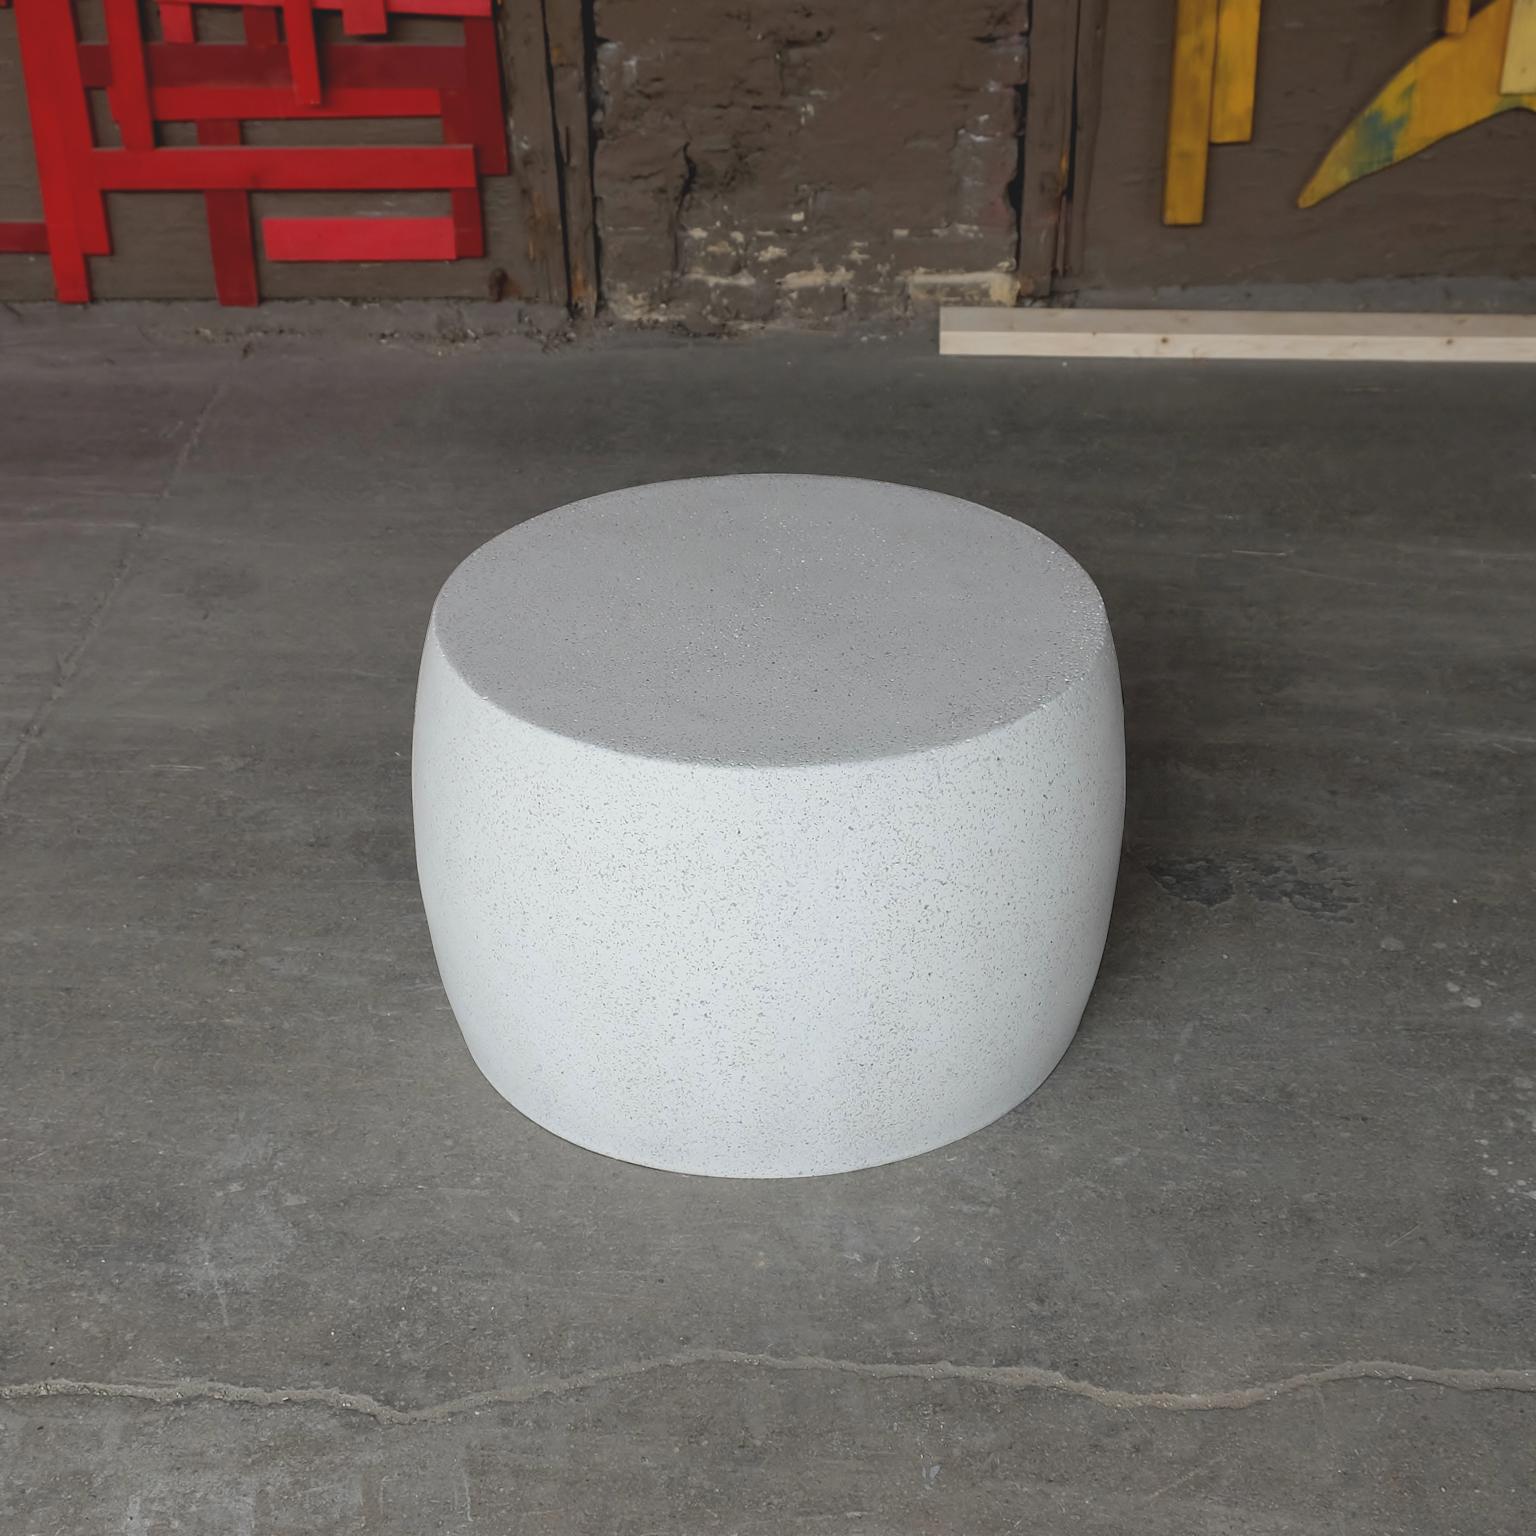 Versatility and elegance distilled into simplicity.

Dimensions: Diameter 24 in. (61 cm), height 15 in. (38 cm). Weight 30 lbs. (14 kg)

Finish color options:
White stone (shown)
Natural stone
Aged stone
Keystone
Coal stone 

Materials: